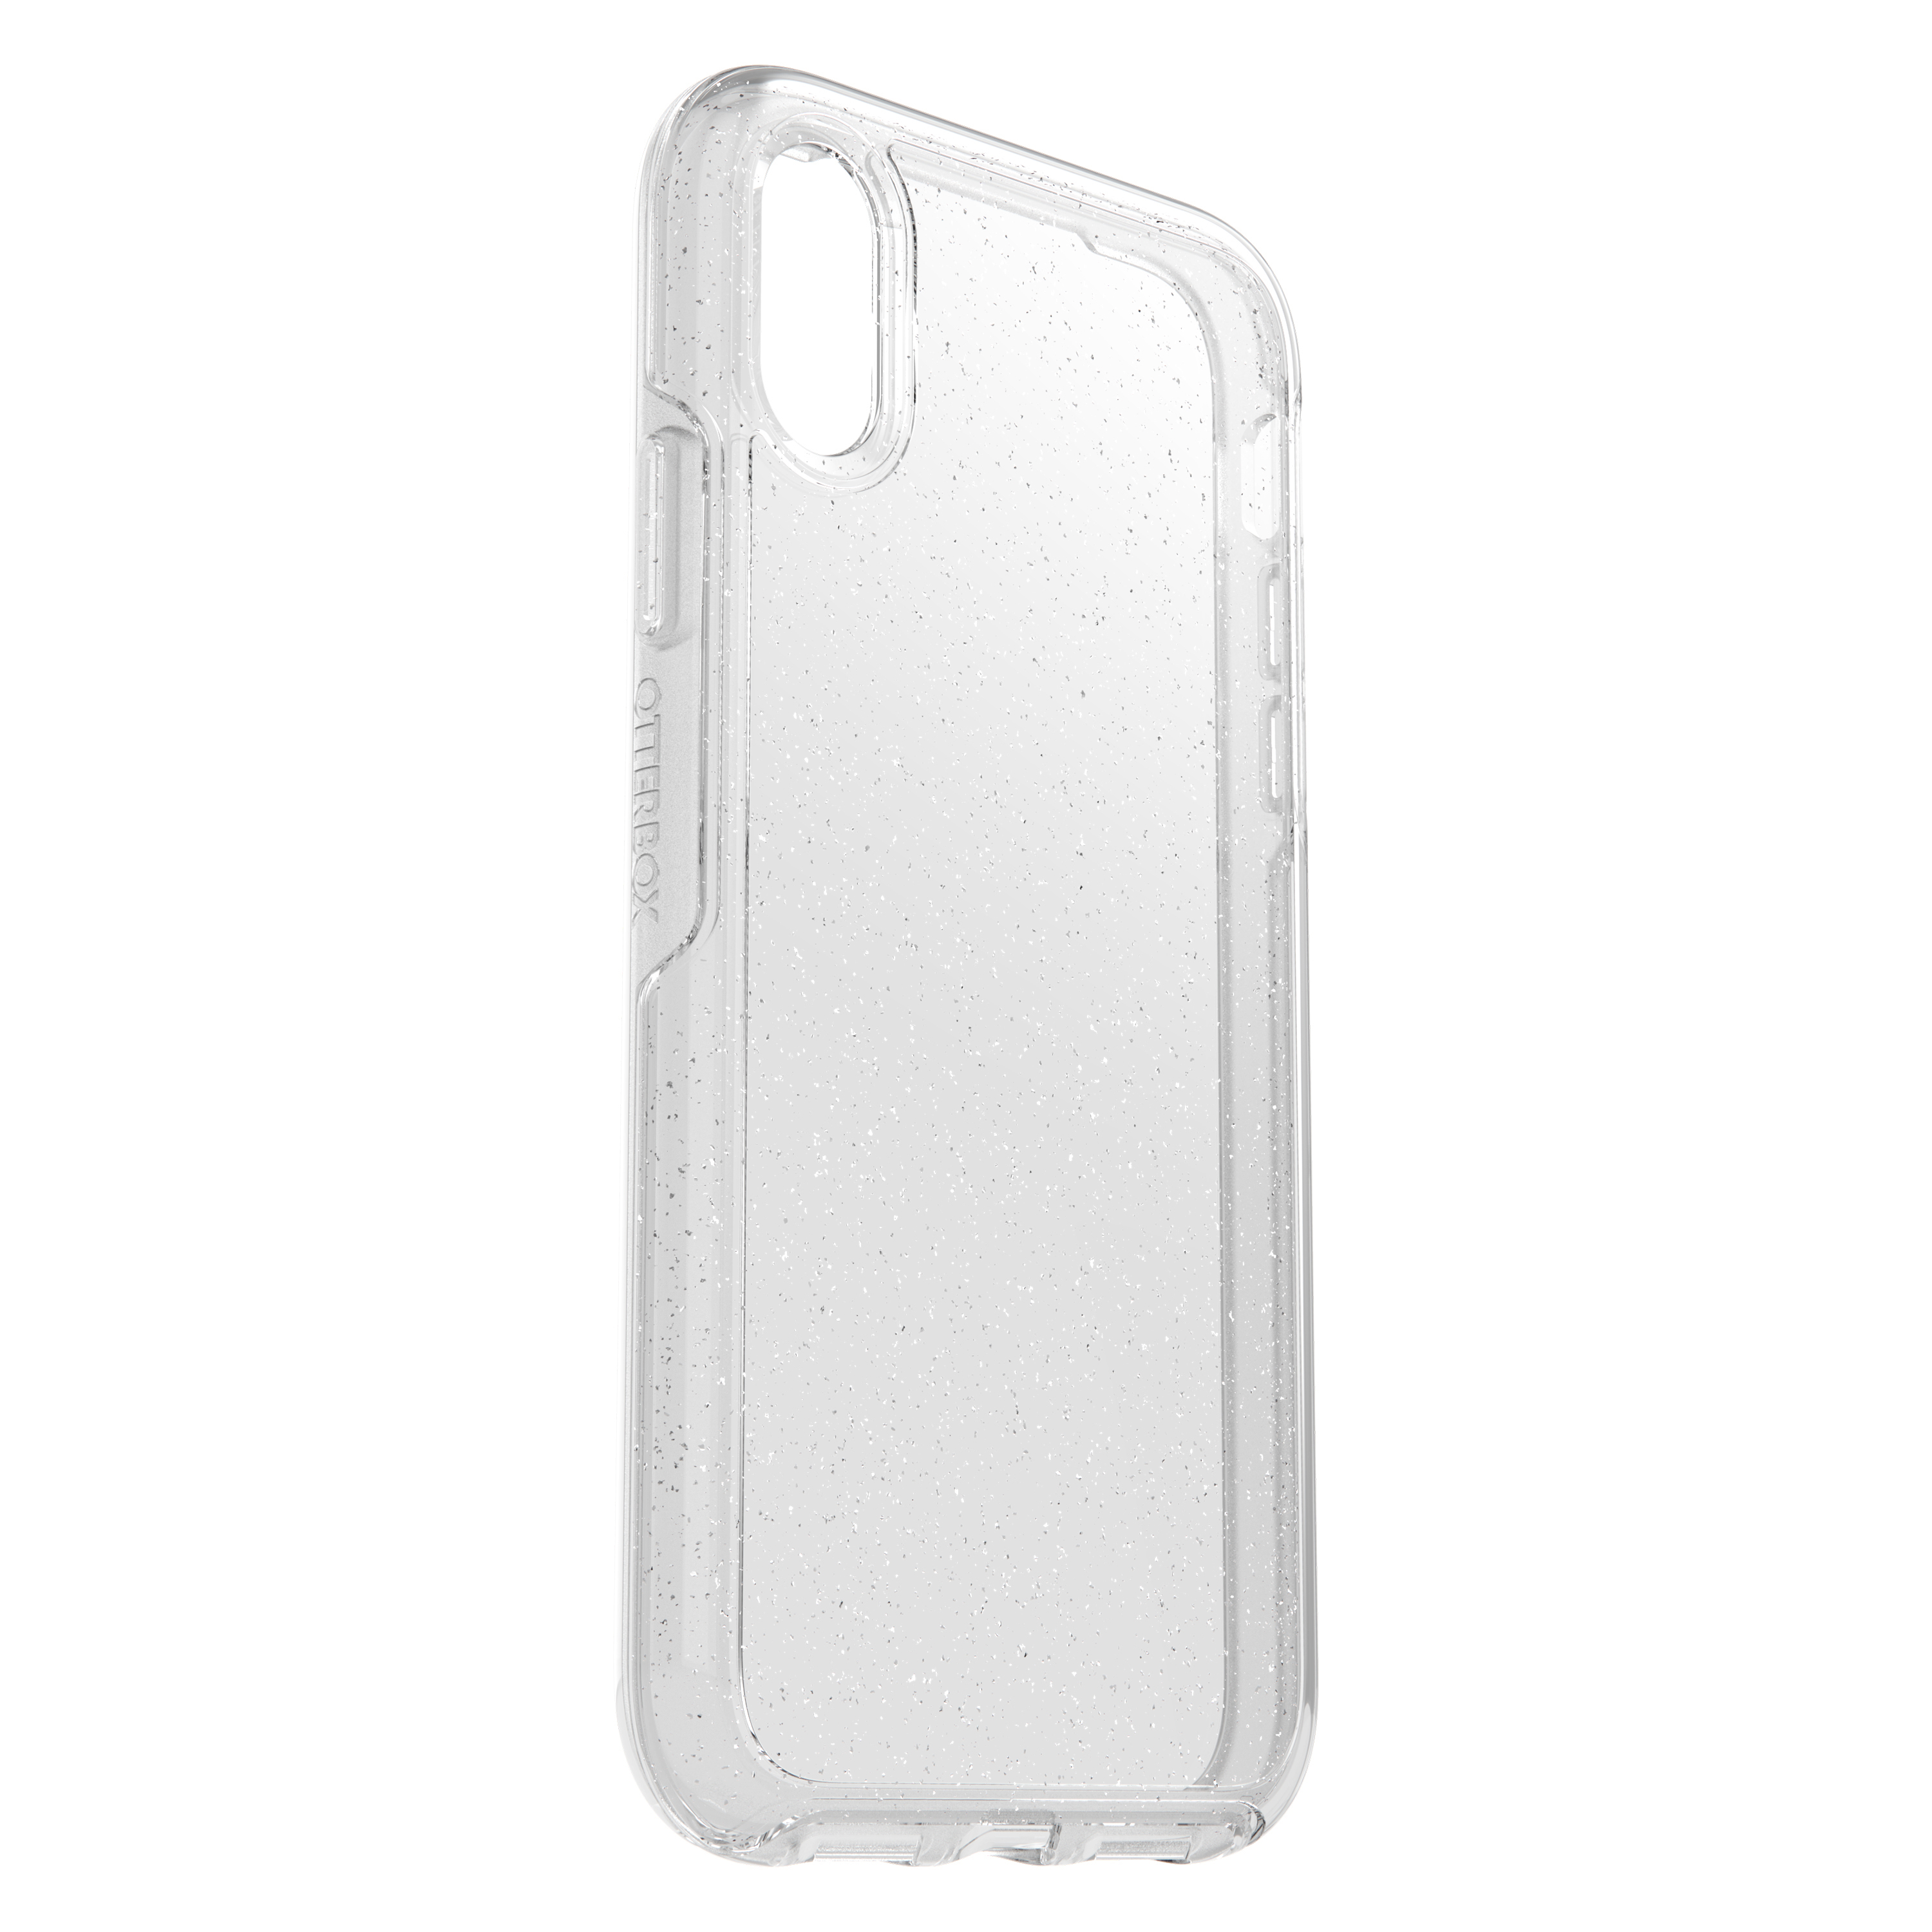 Symmetry, Apple, Backcover, Transparent OTTERBOX XR, iPhone